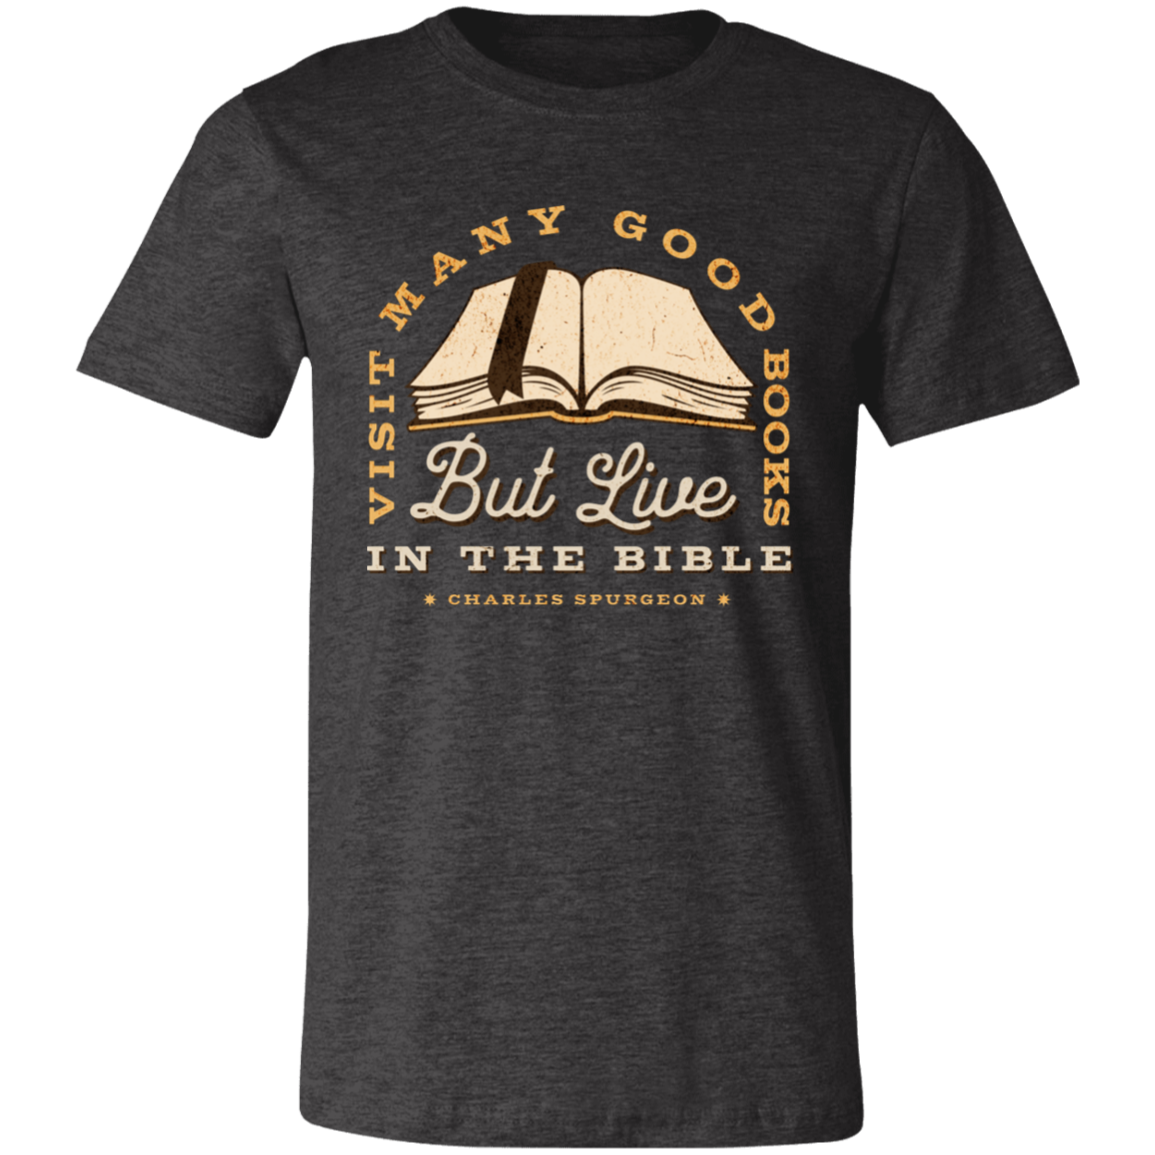 Spurgeon Quote about the Bible, Bible study shirt, tshirt for Christians, pastor gift-T-Shirts-PureDesignTees